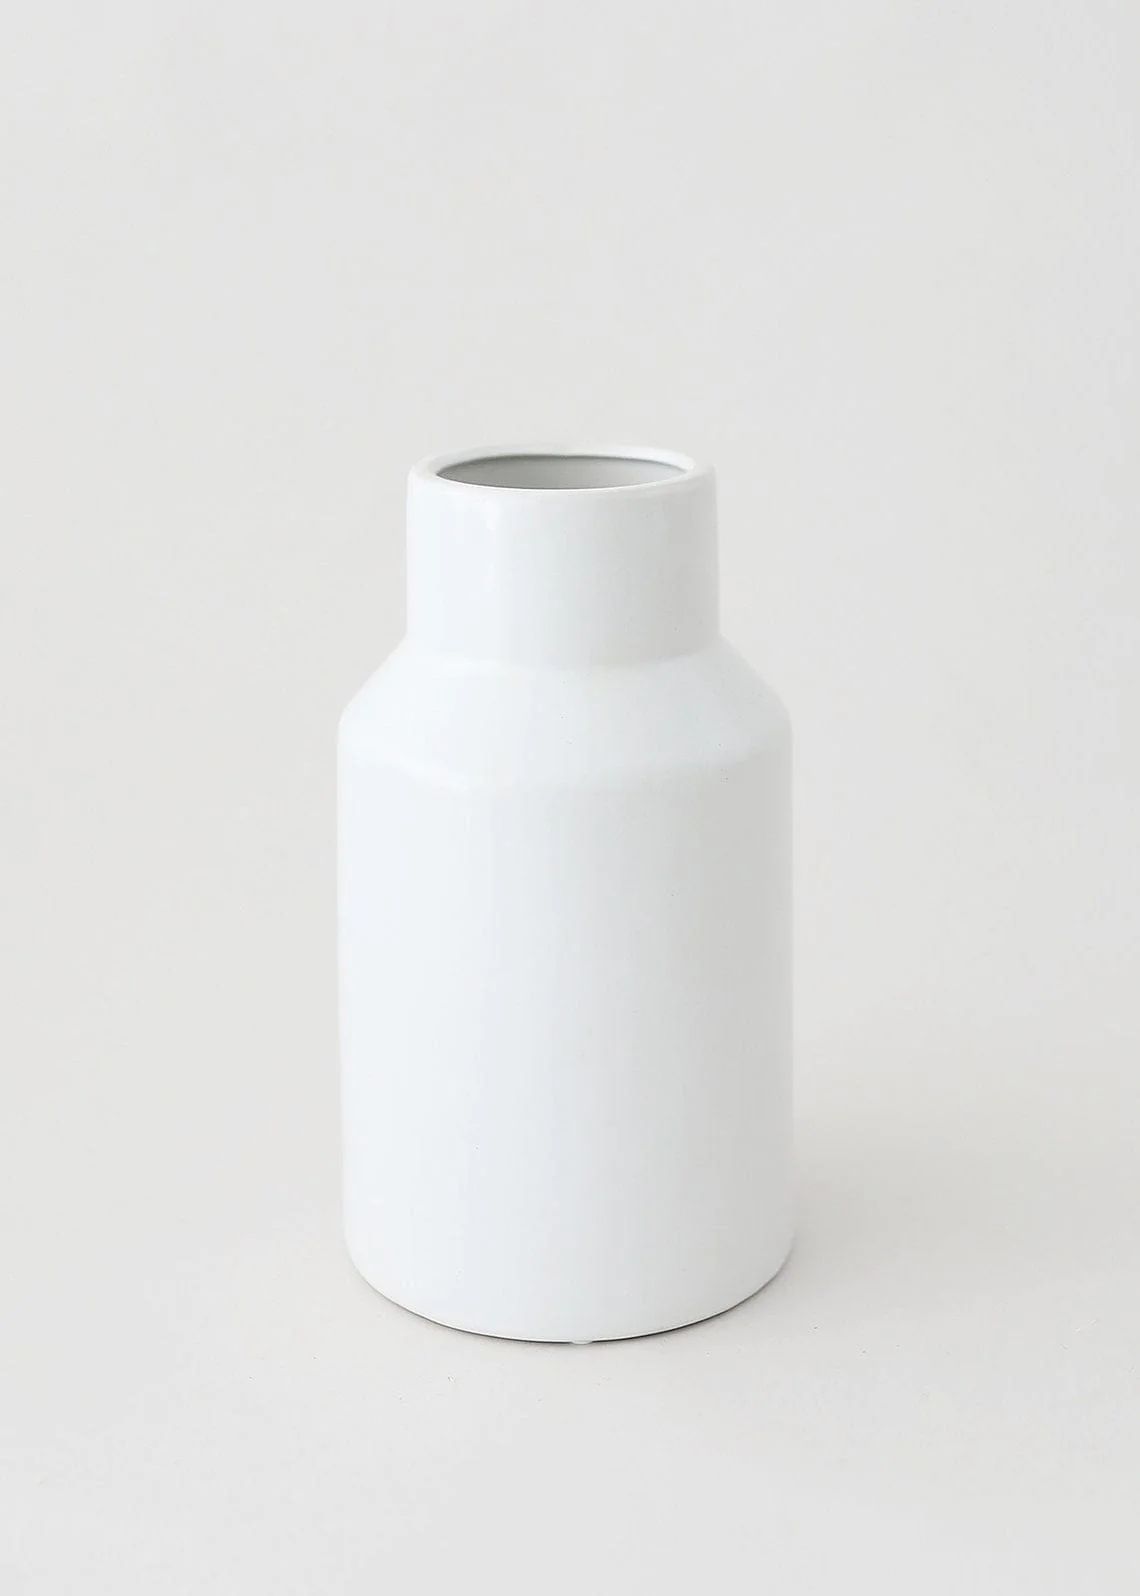 Everyday Flower Vase in White Ceramic - 9" Tall | Afloral (US)